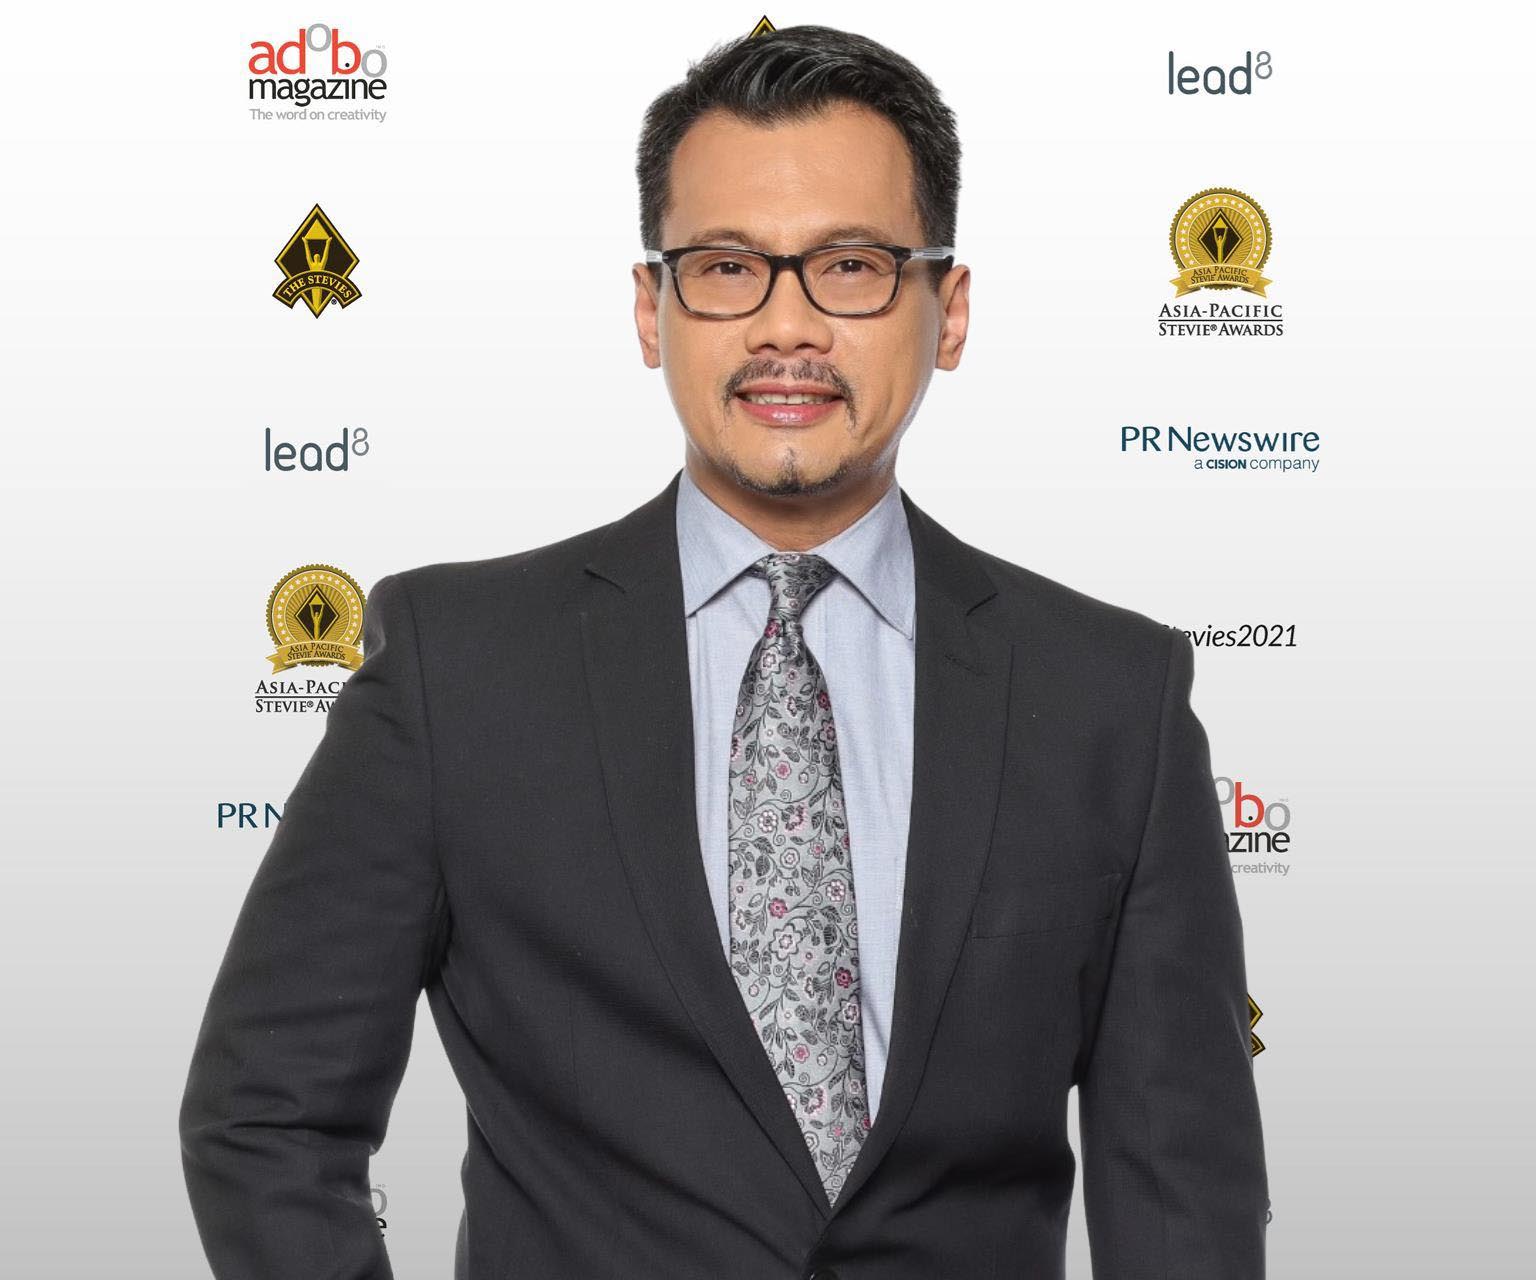 Pru Life UK’s Cha-Ching receives Silver Stevie recognition at the 8th Annual Asia-Pacific Stevie Awards